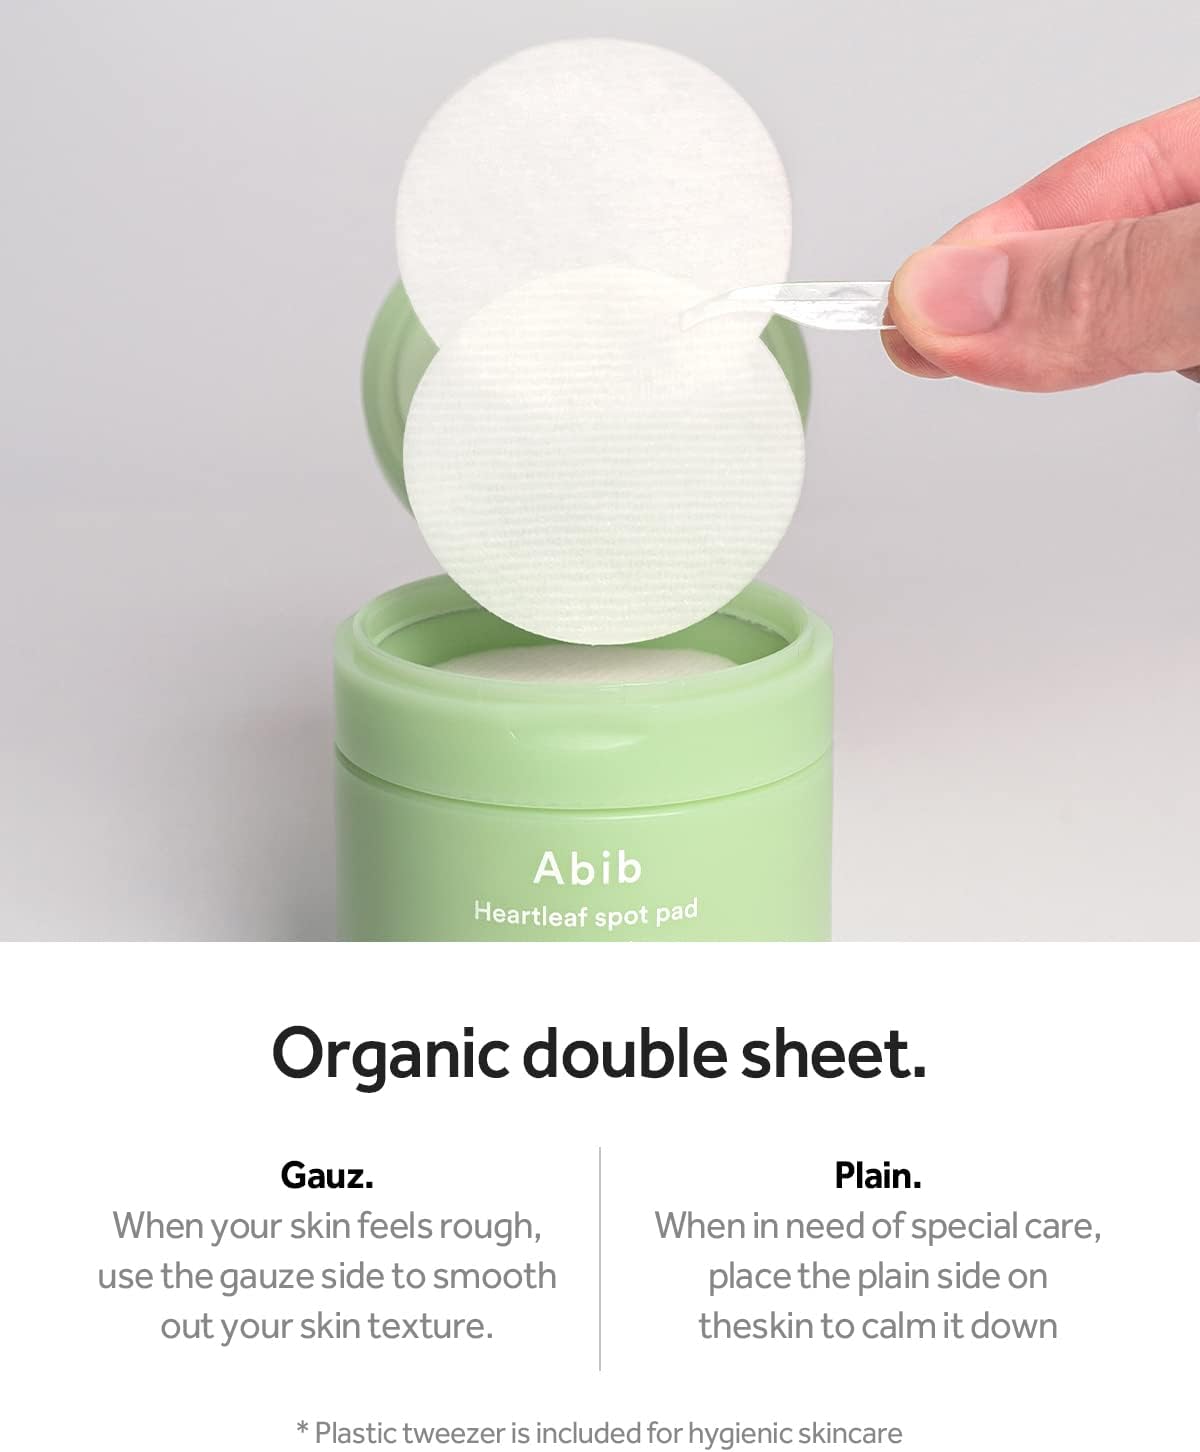 Abib Heartleaf Spot pad Calming touch (80 pads)